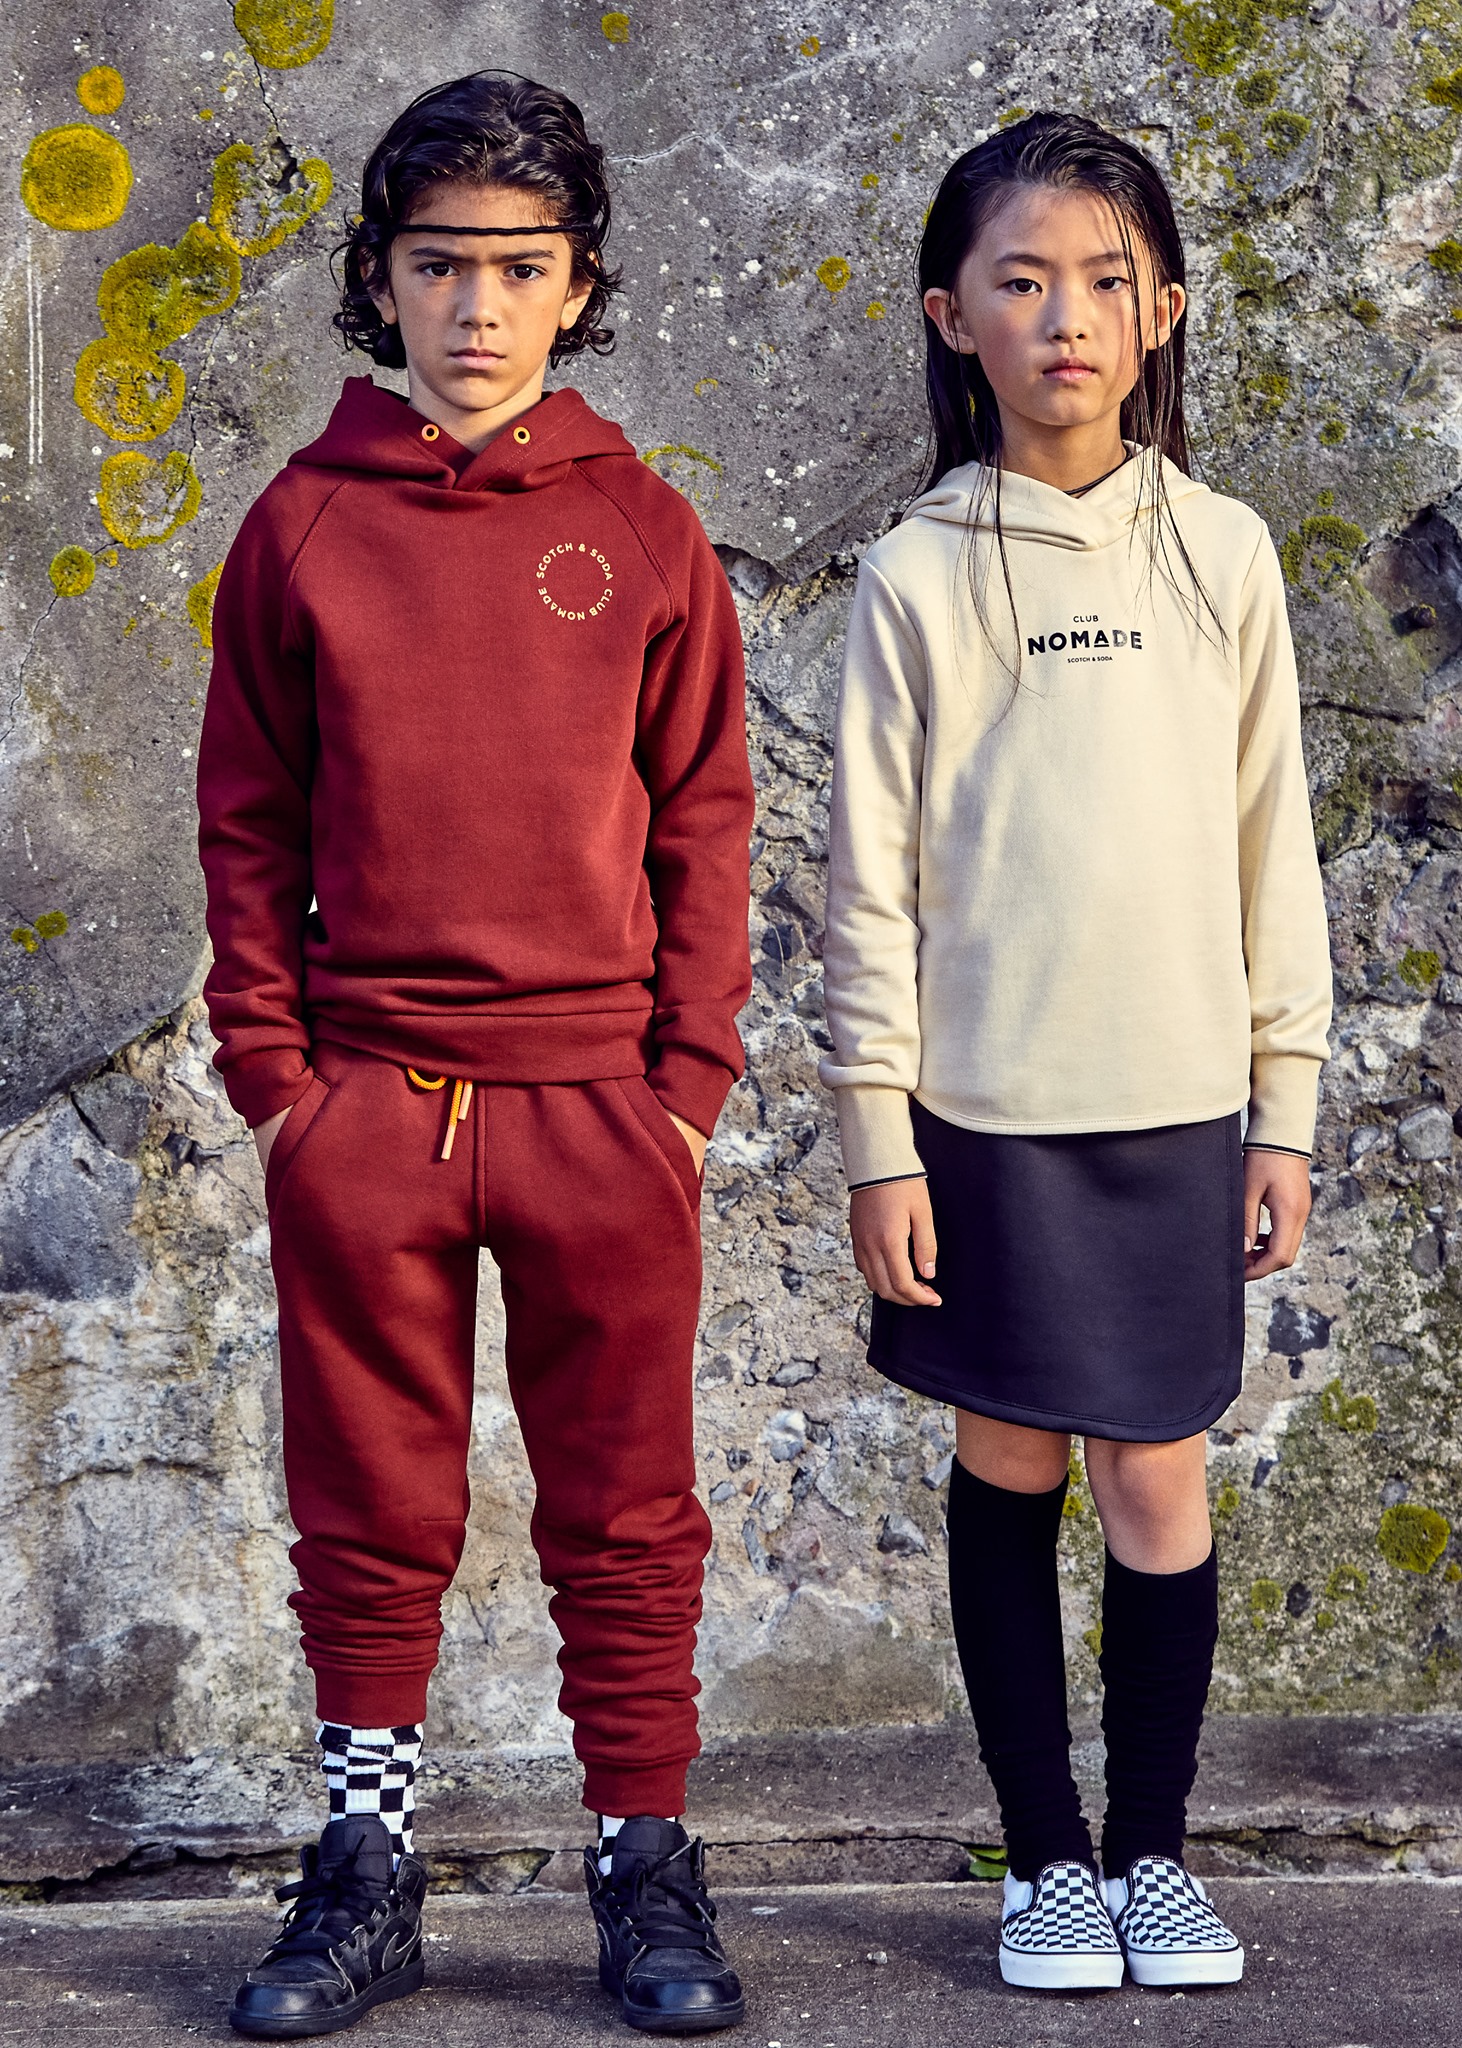 Relaxed style starts with comfort sweats and an extra dose of tailoring. Shop Scotch & Soda Club Nomade for kids here.